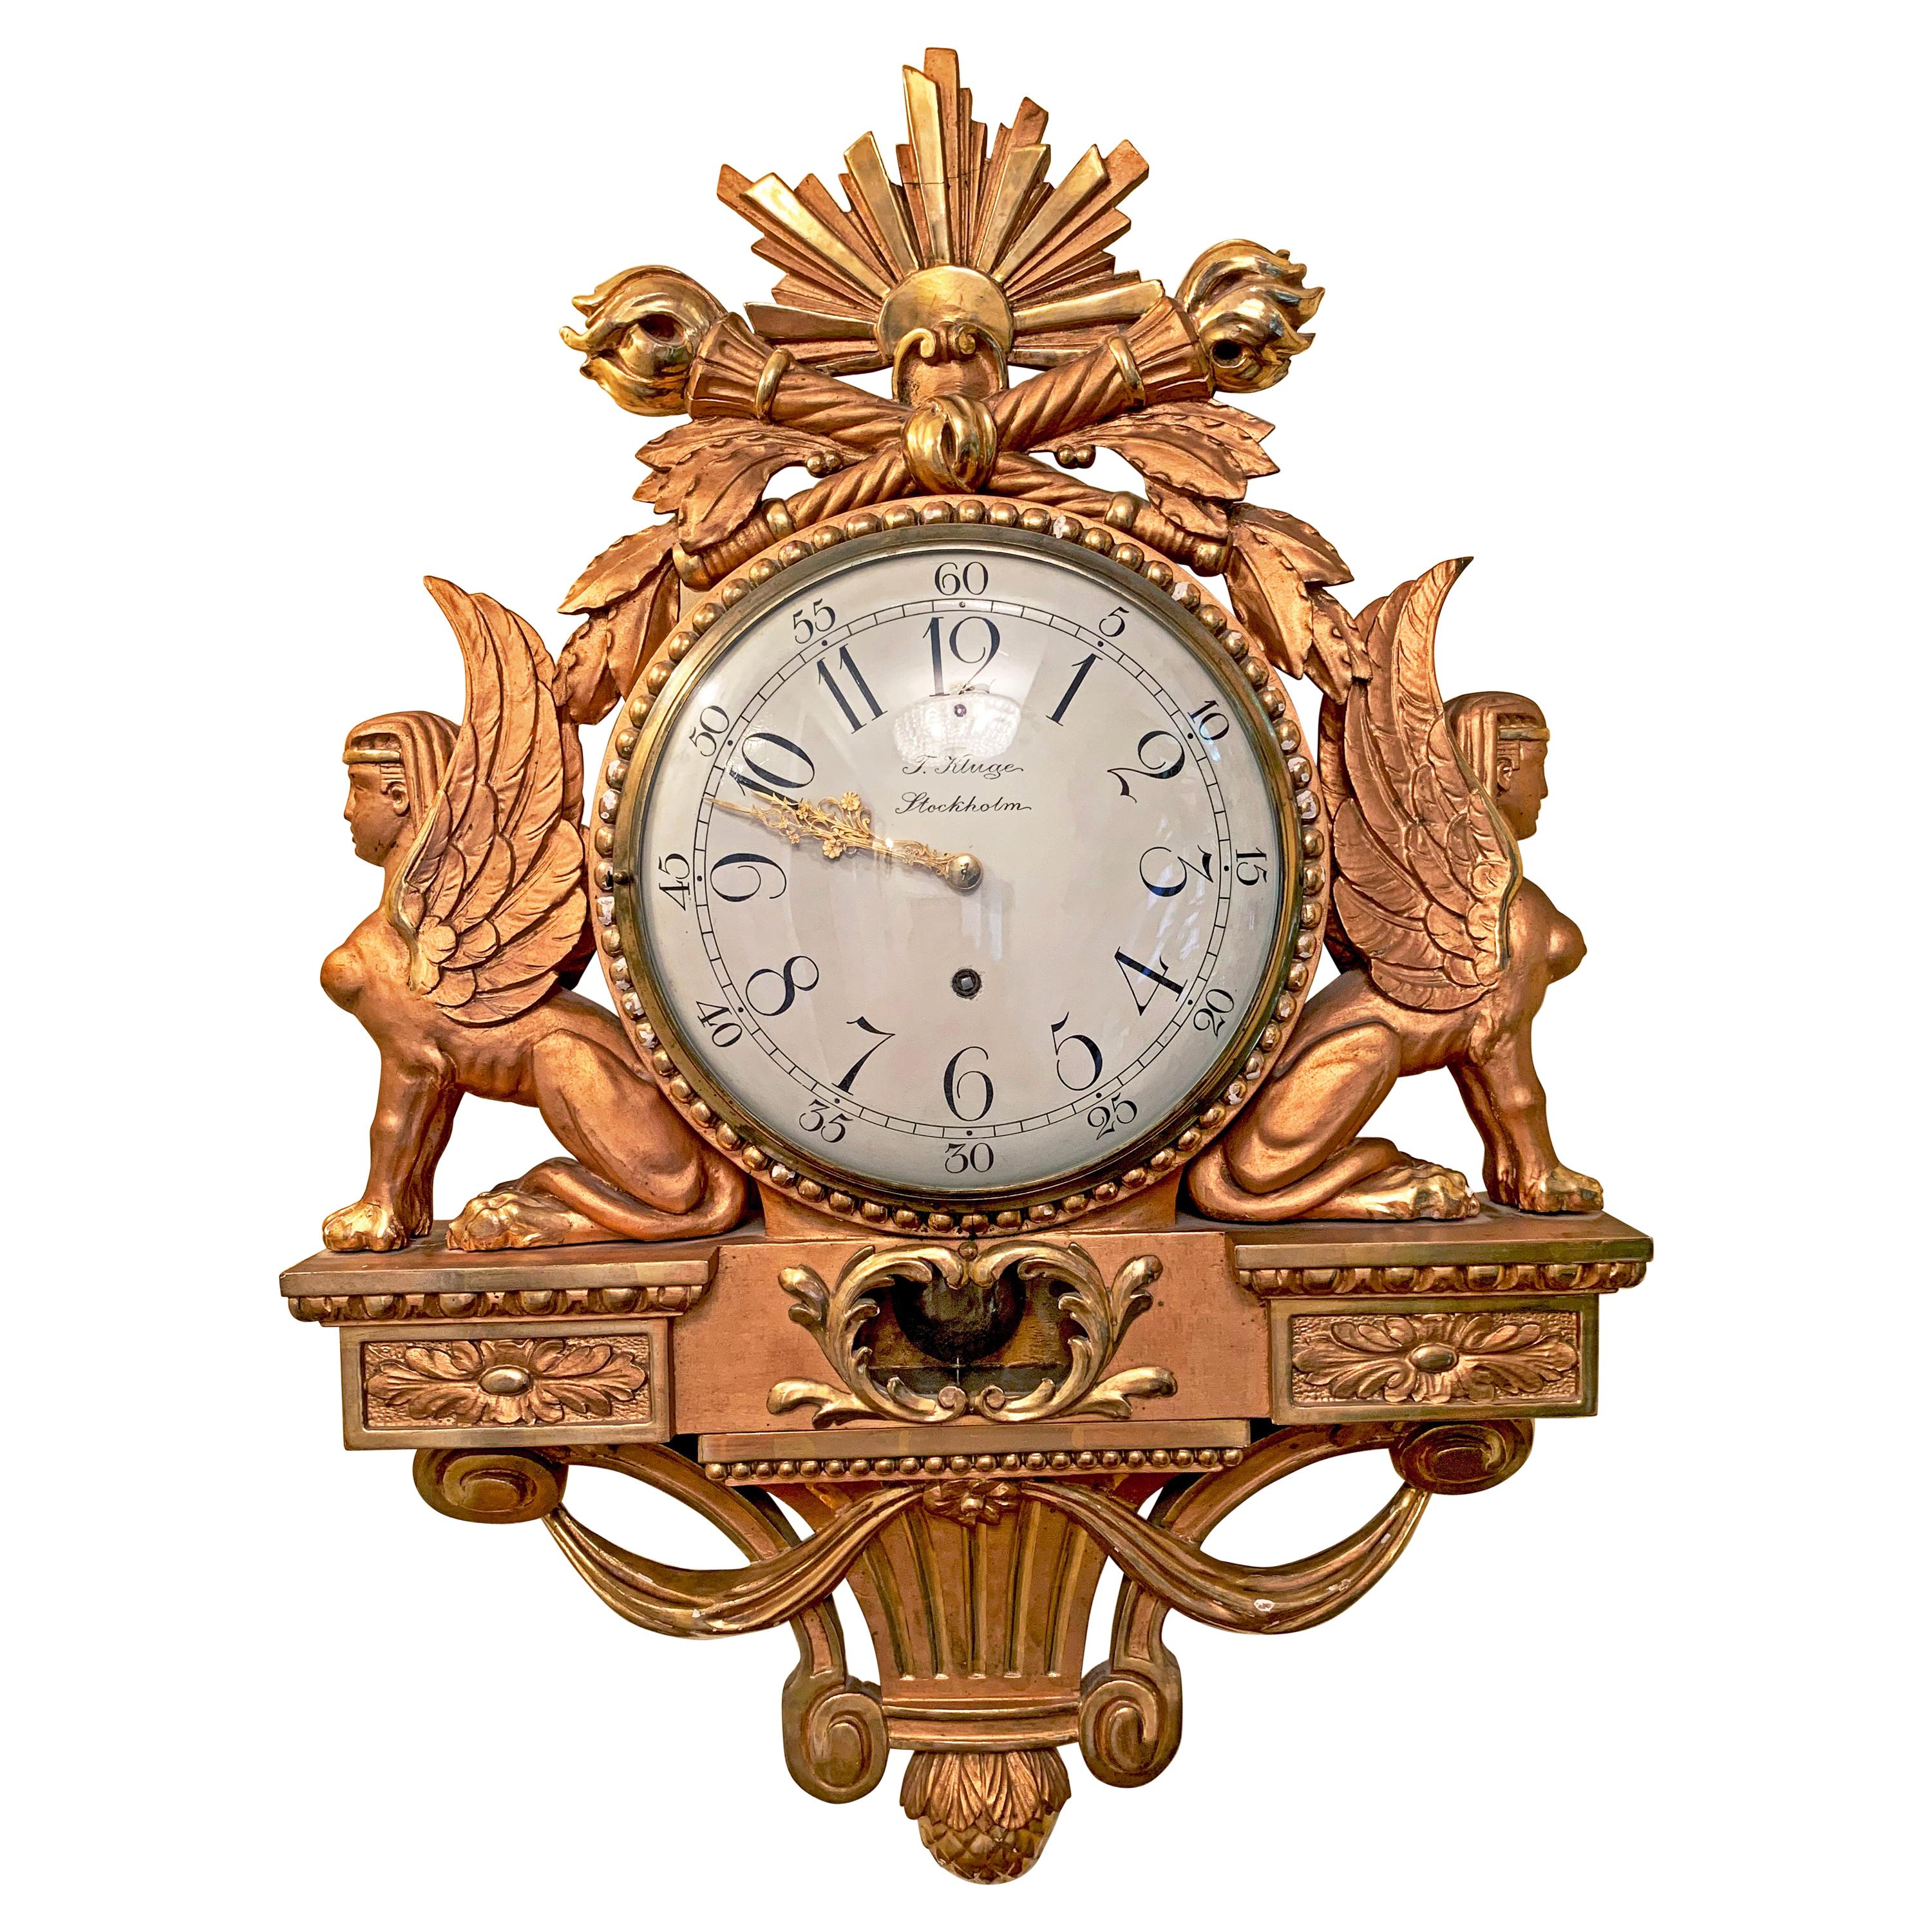 19th Century Empire Clock Gold T Kluge Stockholm with Sphinxes on Each Side